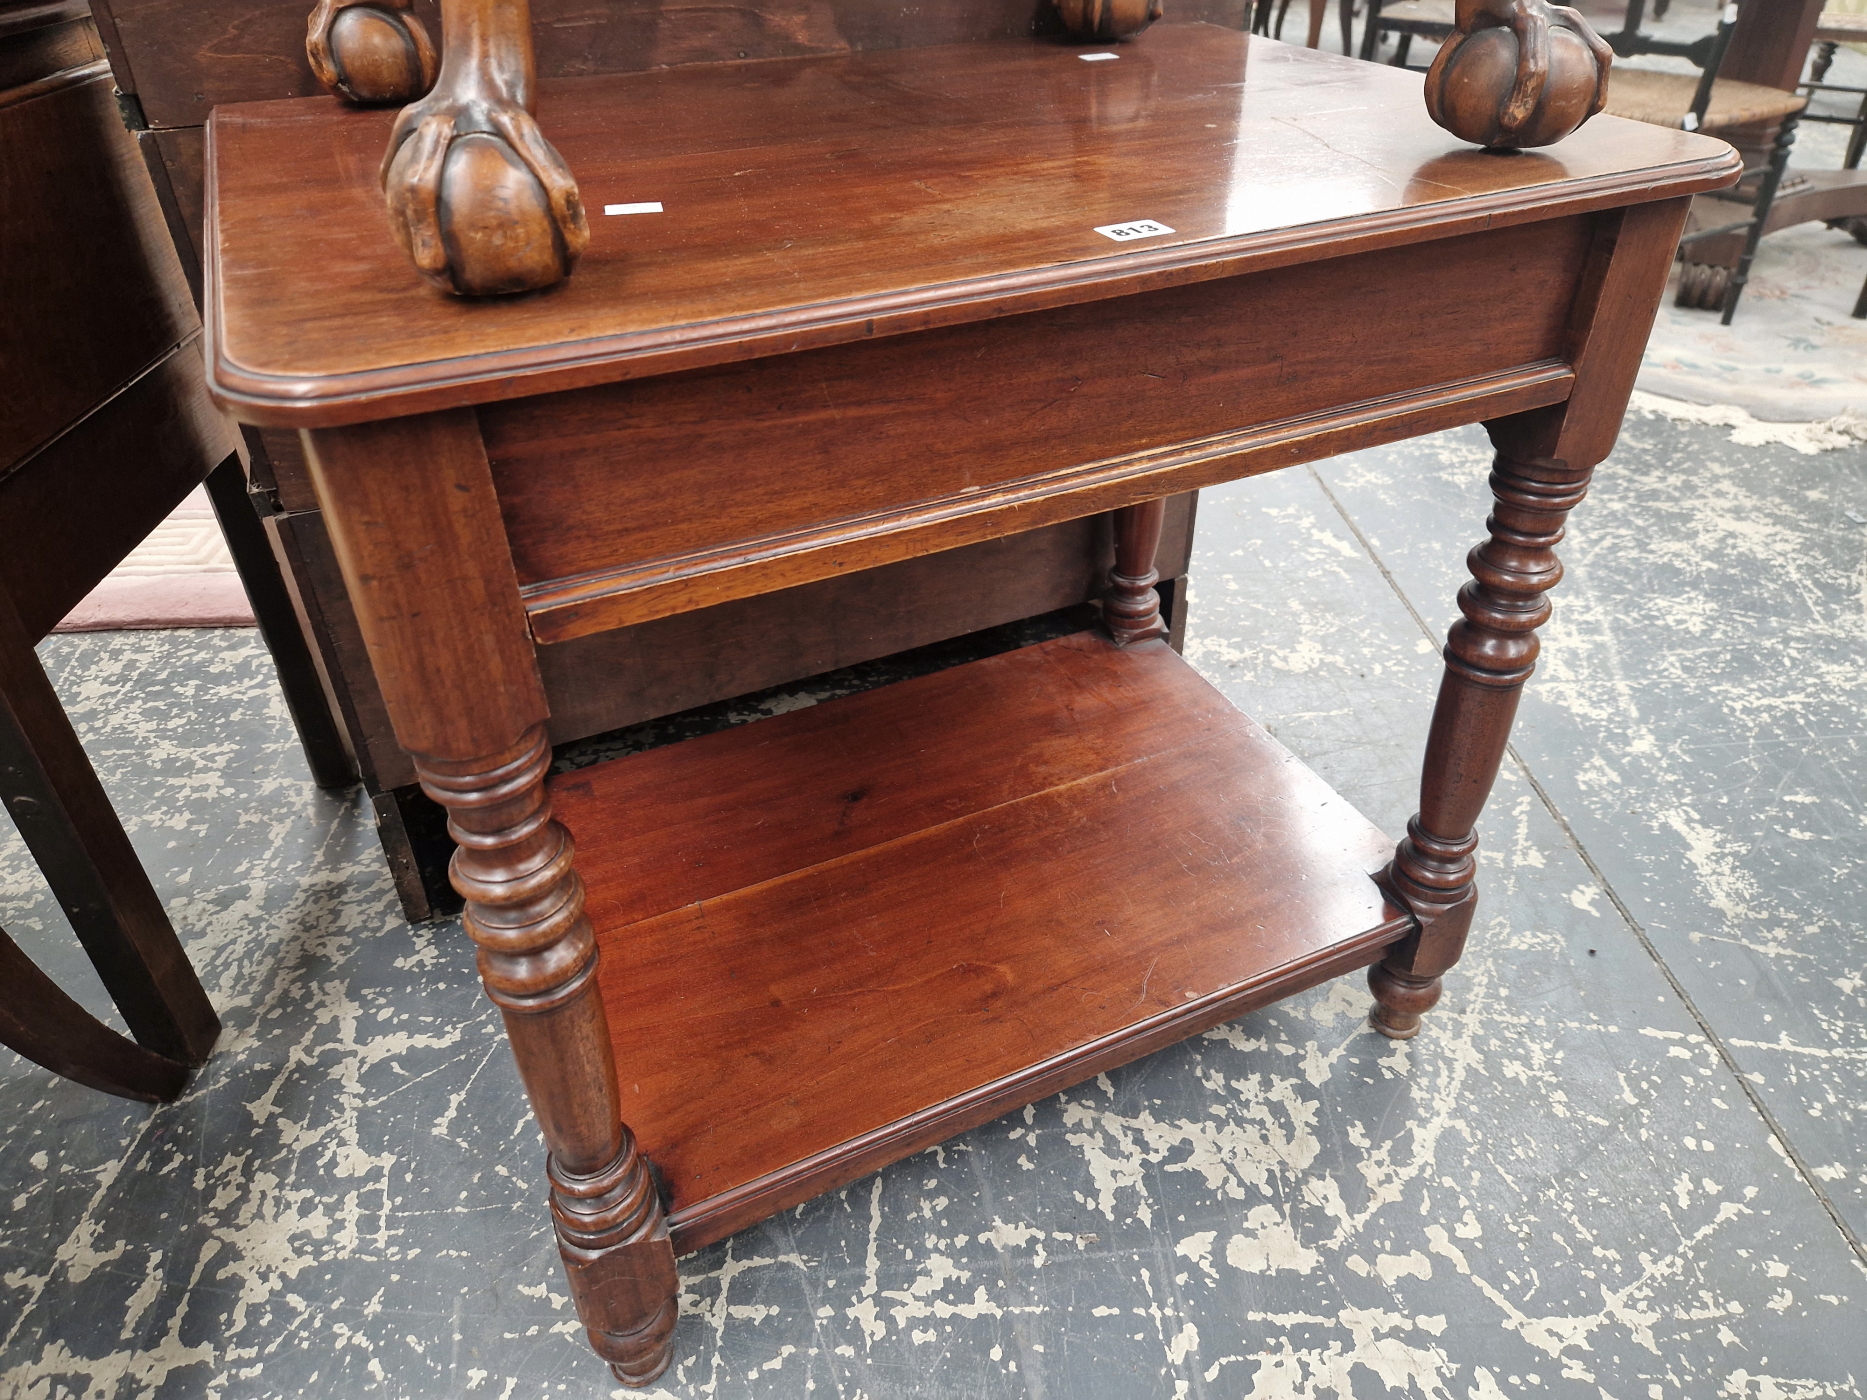 A VICTORIAN MAHOGANY TWO TIER TABLE WITH A SINGLE APRON DRAWER BELOW THE TOP.   W 78 x D 53 x H